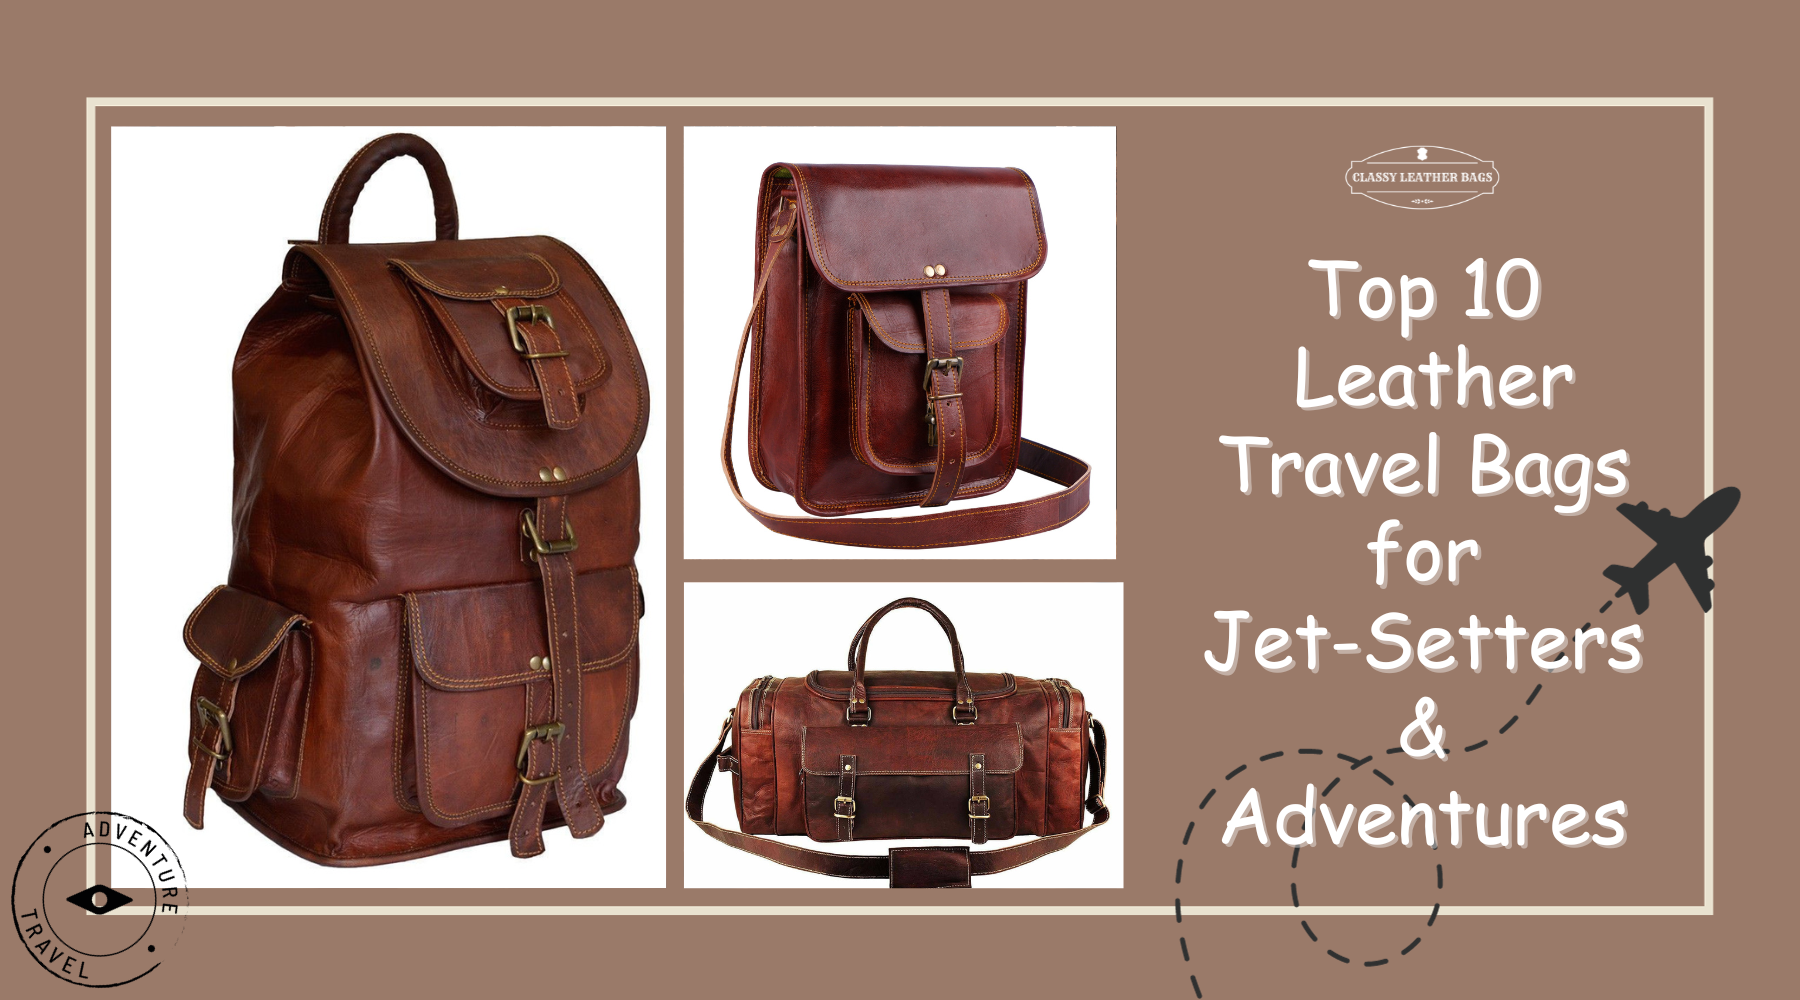 Top 10 Leather Travel Bags for Jet-Setters and Adventurers